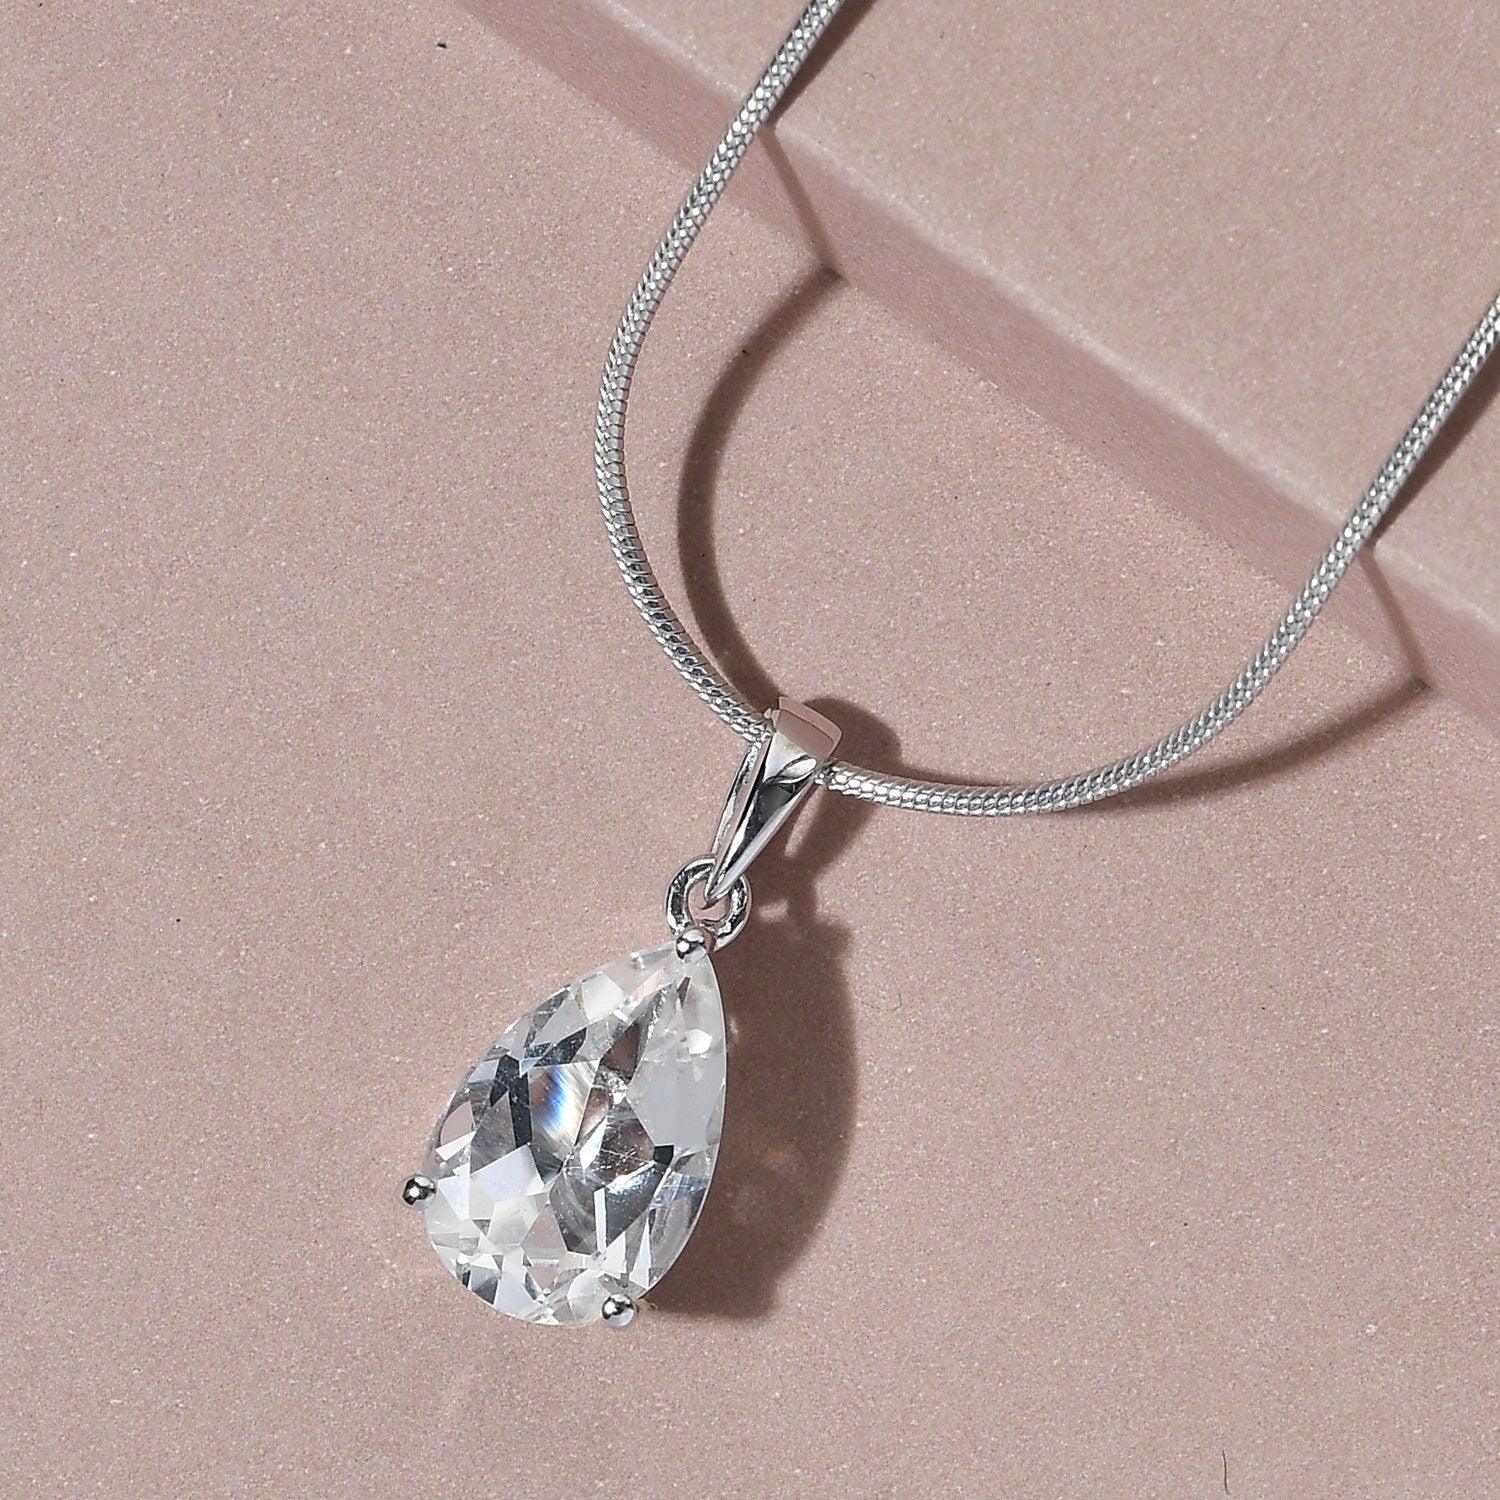 Genuine White Topaz Pendant, Solitaire Pendant, April Birthstone Necklace, 925 Sterling Silver, White Topaz Necklace, Gift for her - Inspiring Jewellery